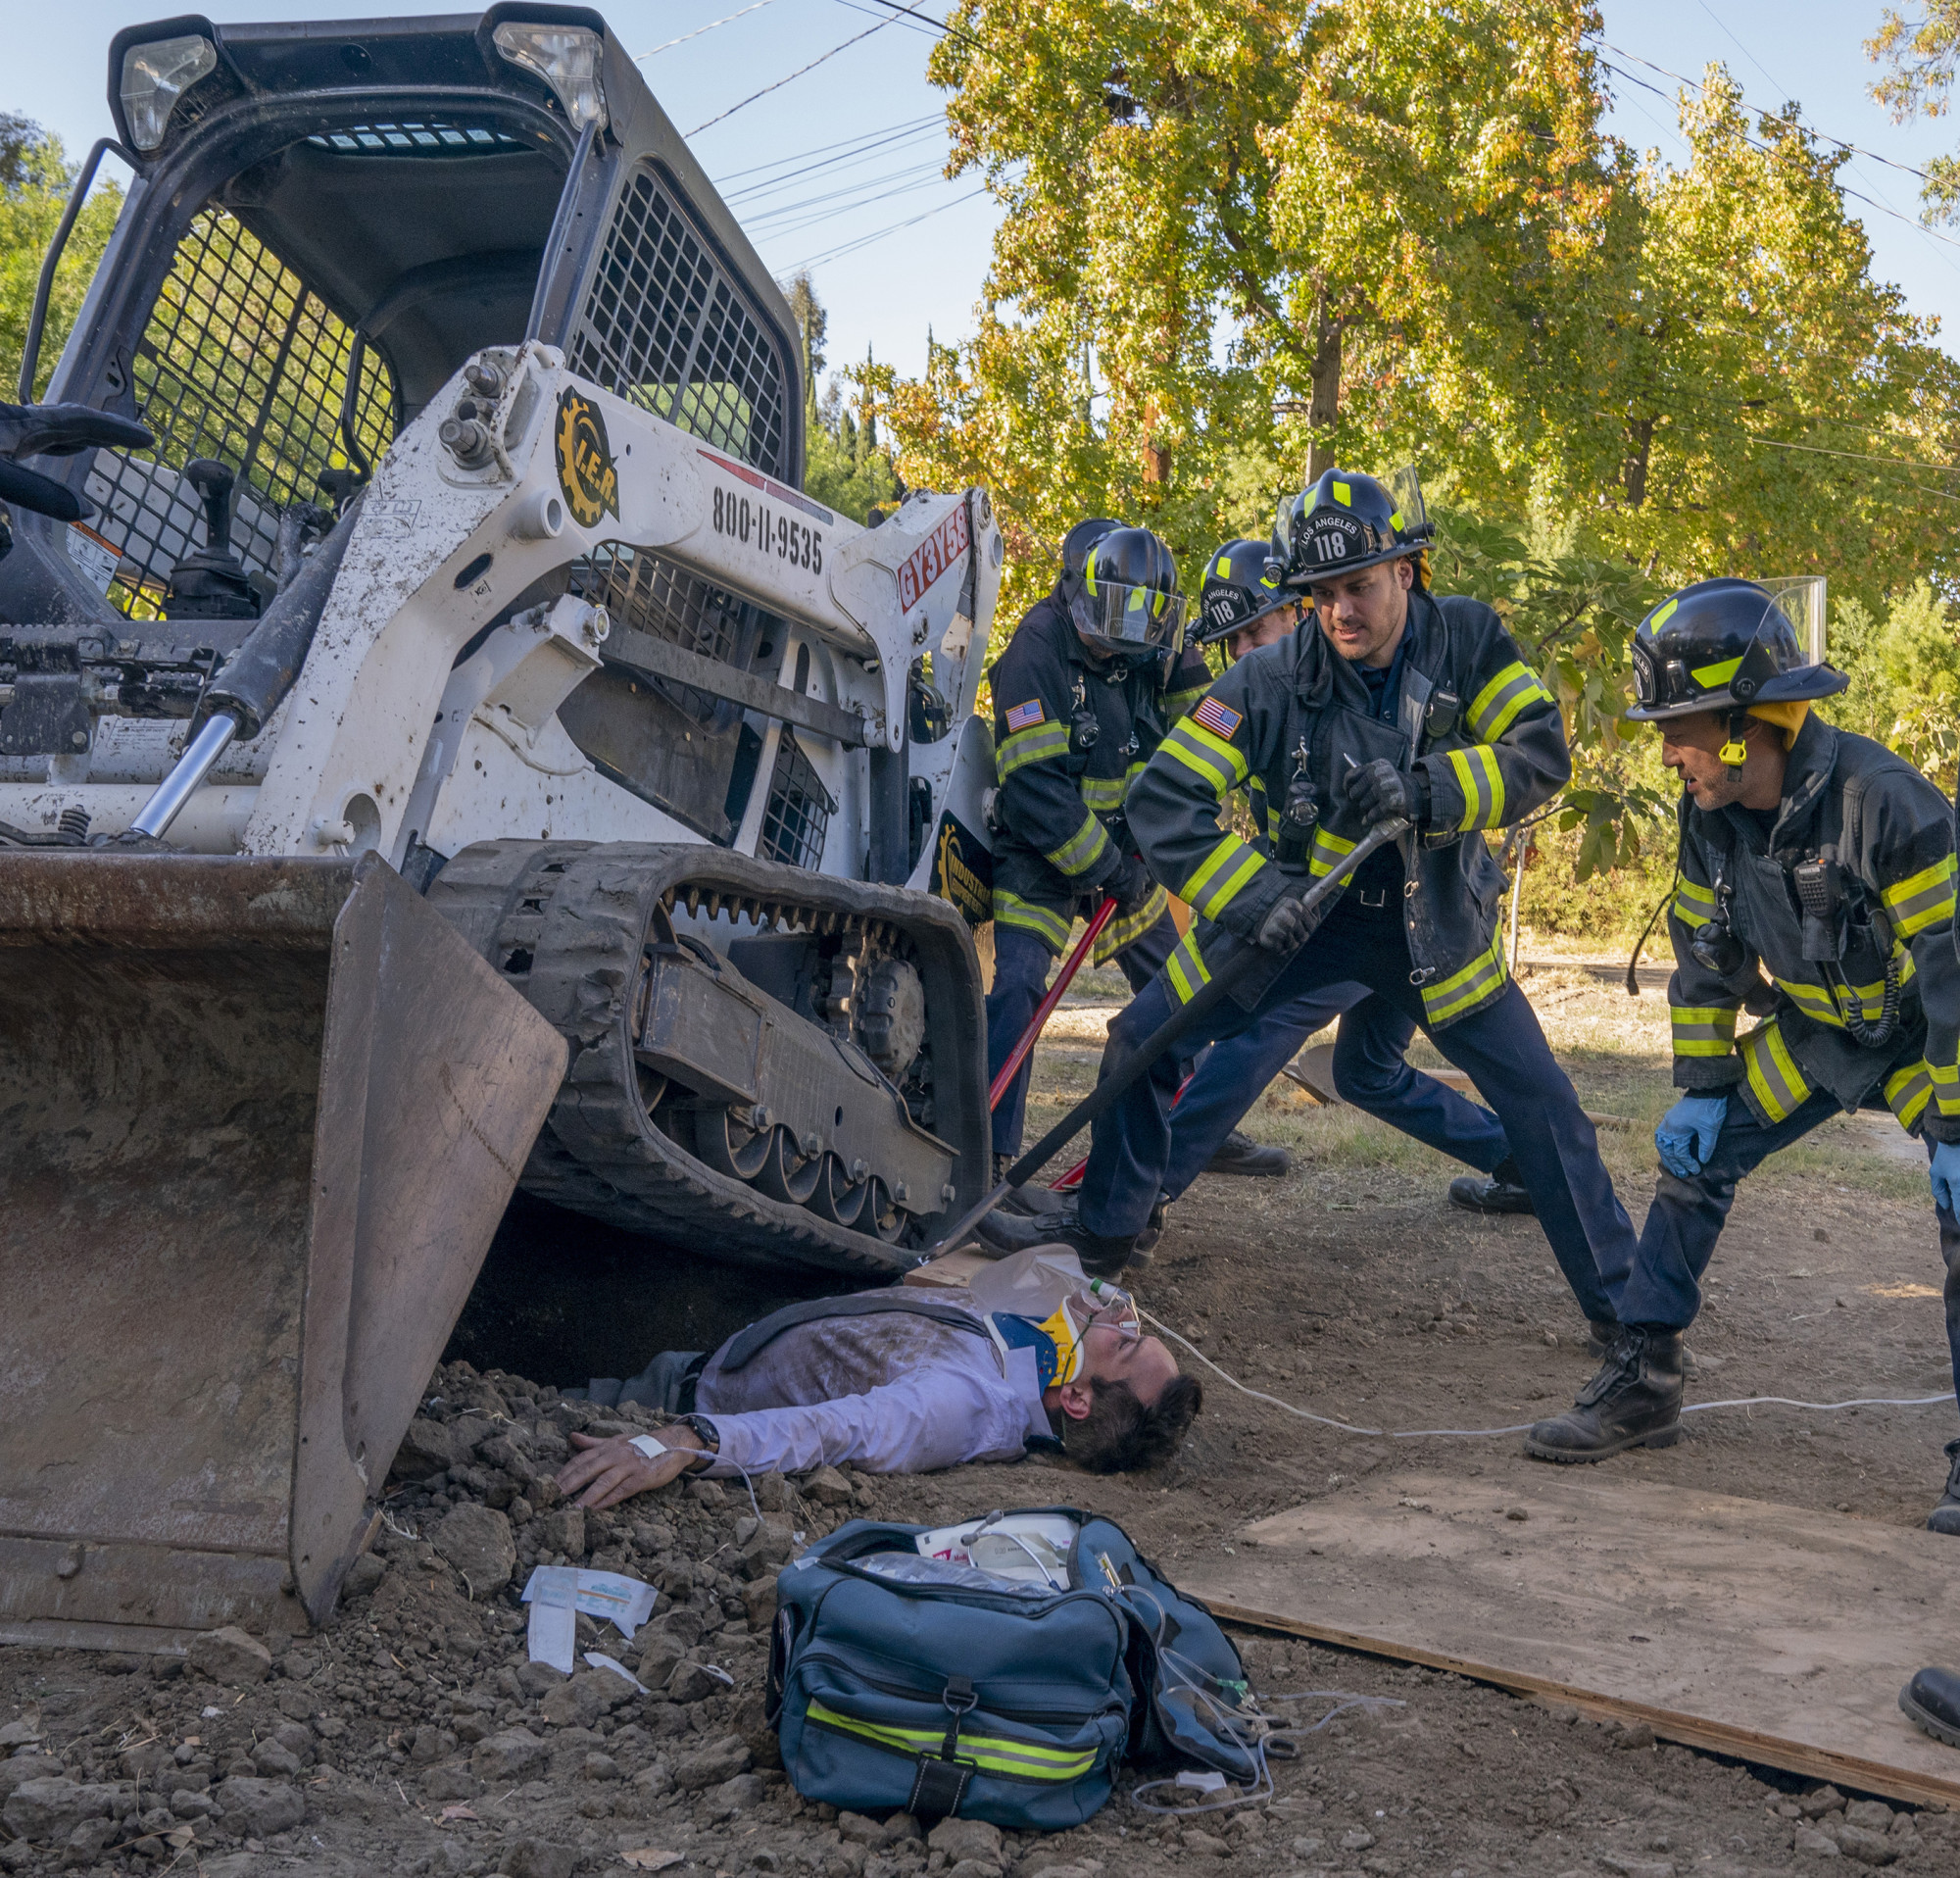 9-1-1: L-R: Guest star Riley Schmidt, Ryan Guzman and Kenneth Choi in the “Seize The Day” spring premiere episode of 9-1-1 airing Sunday, March 16 (8:00-9:00 PM ET/PT) on FOX. CR: Jack Zeman / FOX. © 2020 FOX MEDIA LLC.